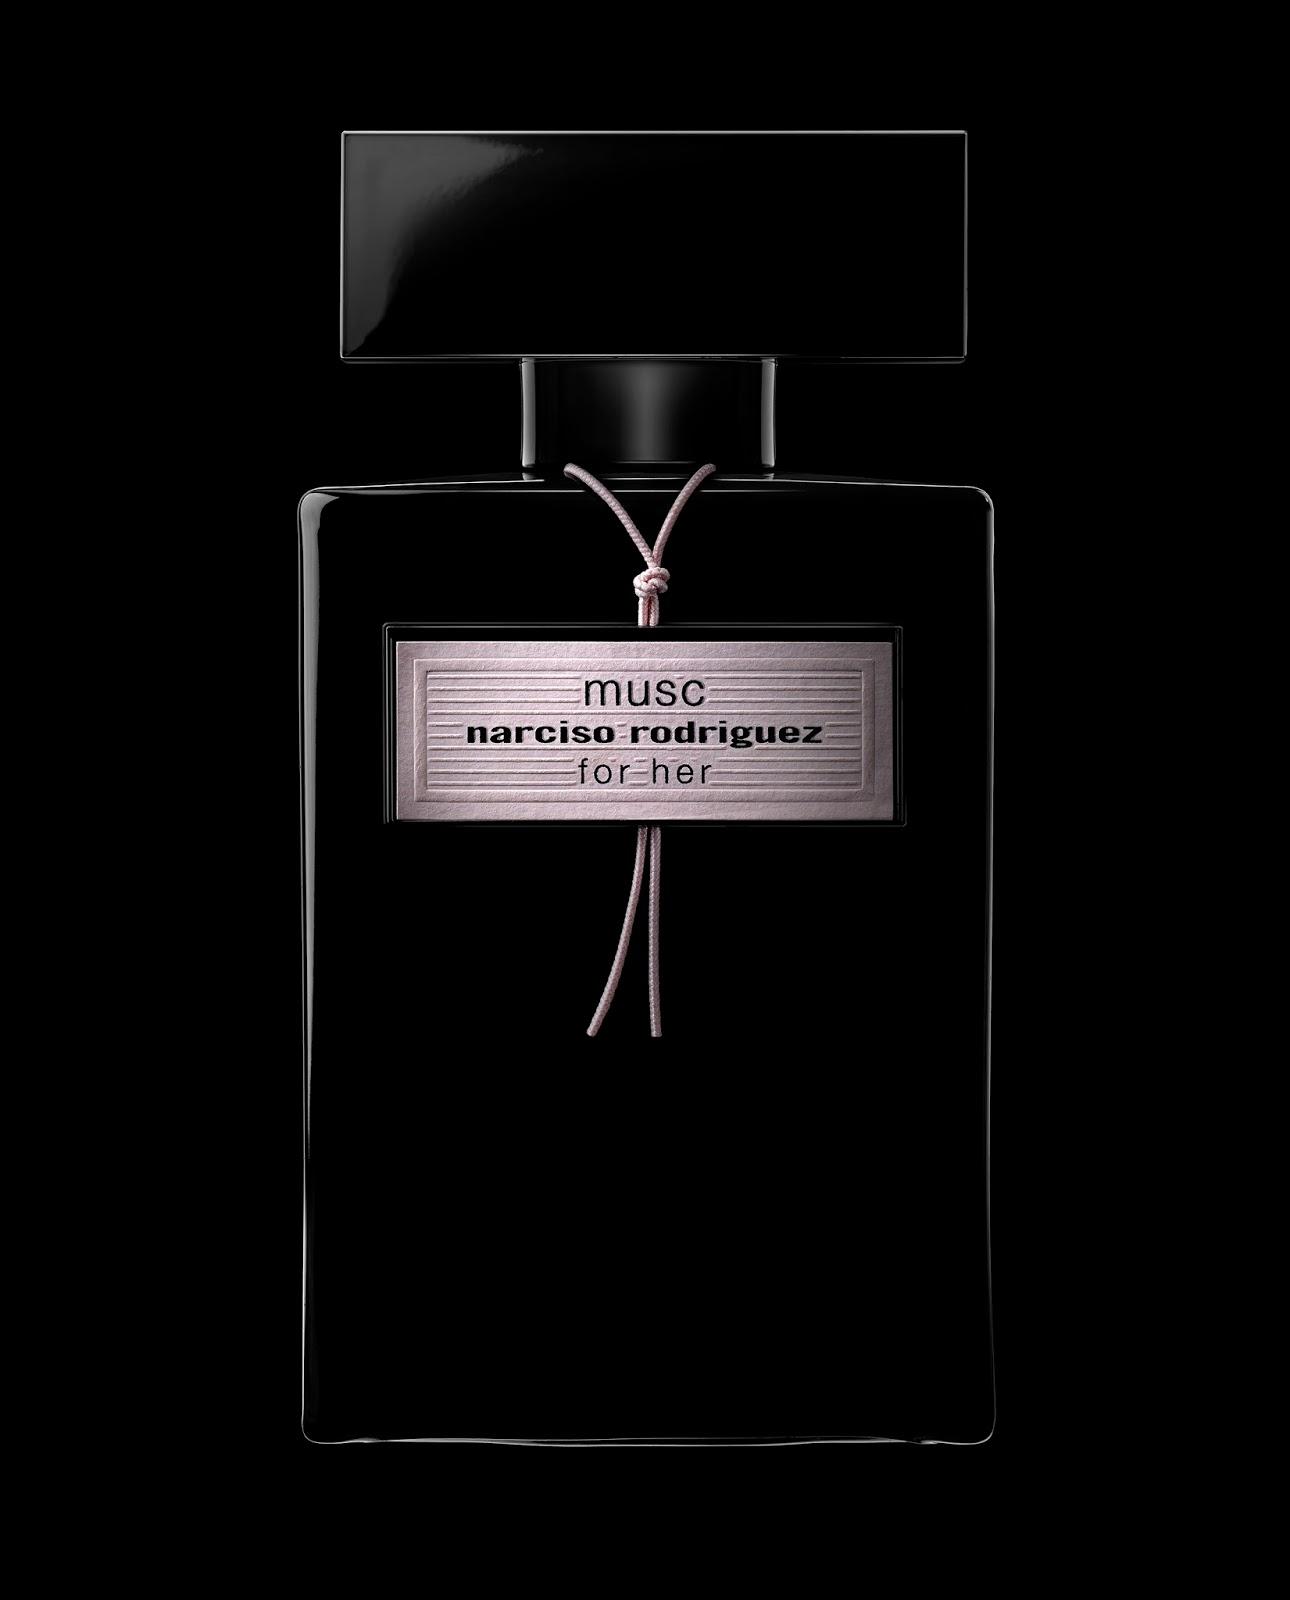 Narciso Rodriguez celebration musc for her – aceite perfume